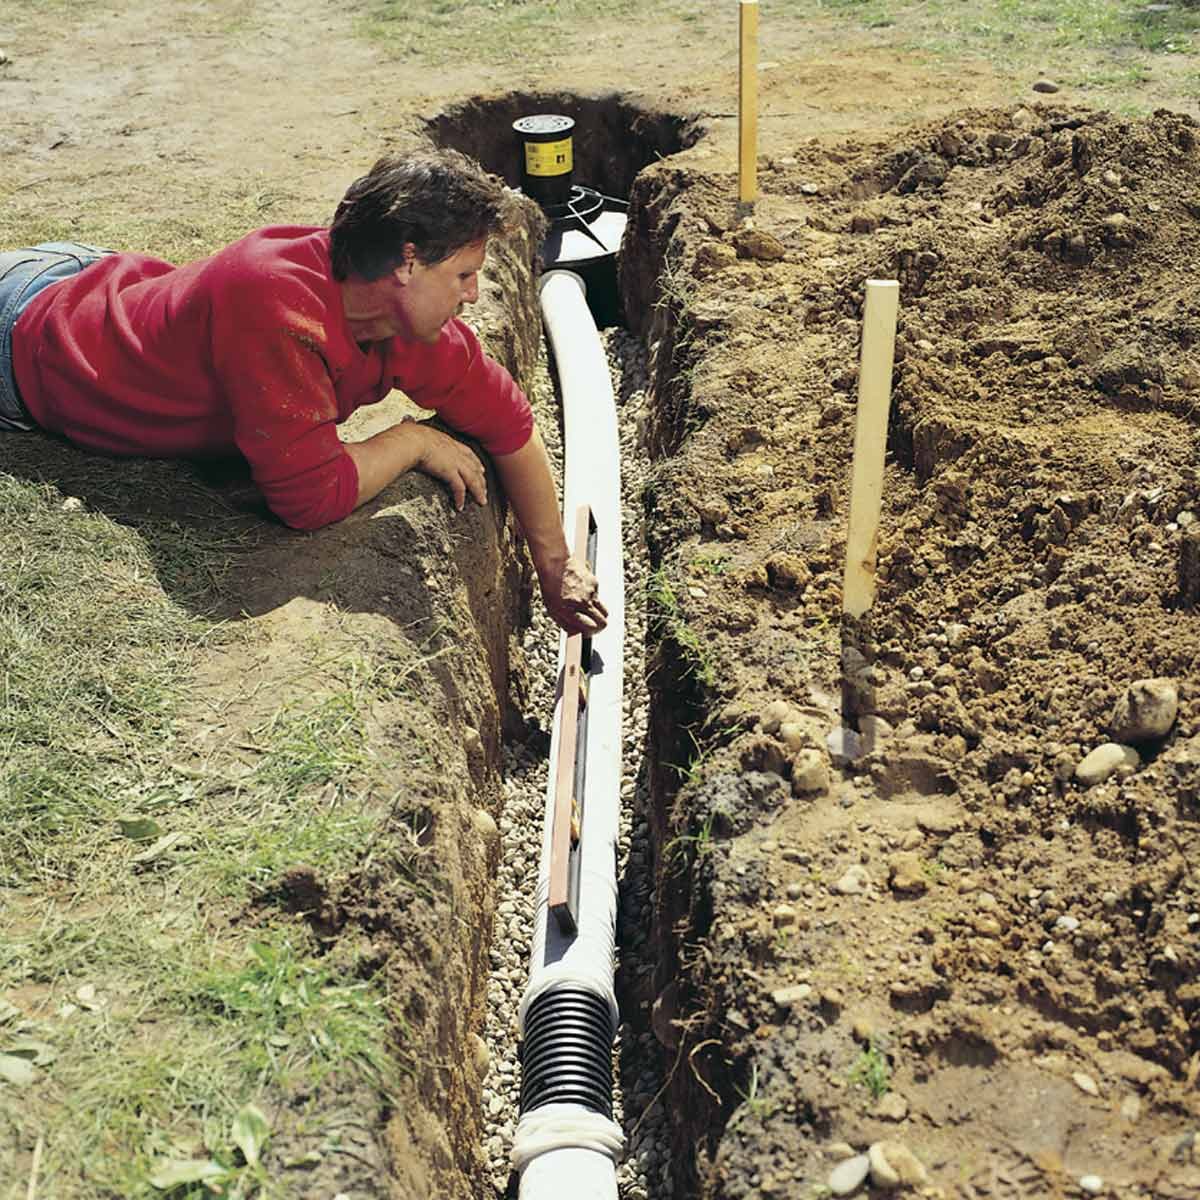 Install An In Ground Drainage System Family Handyman